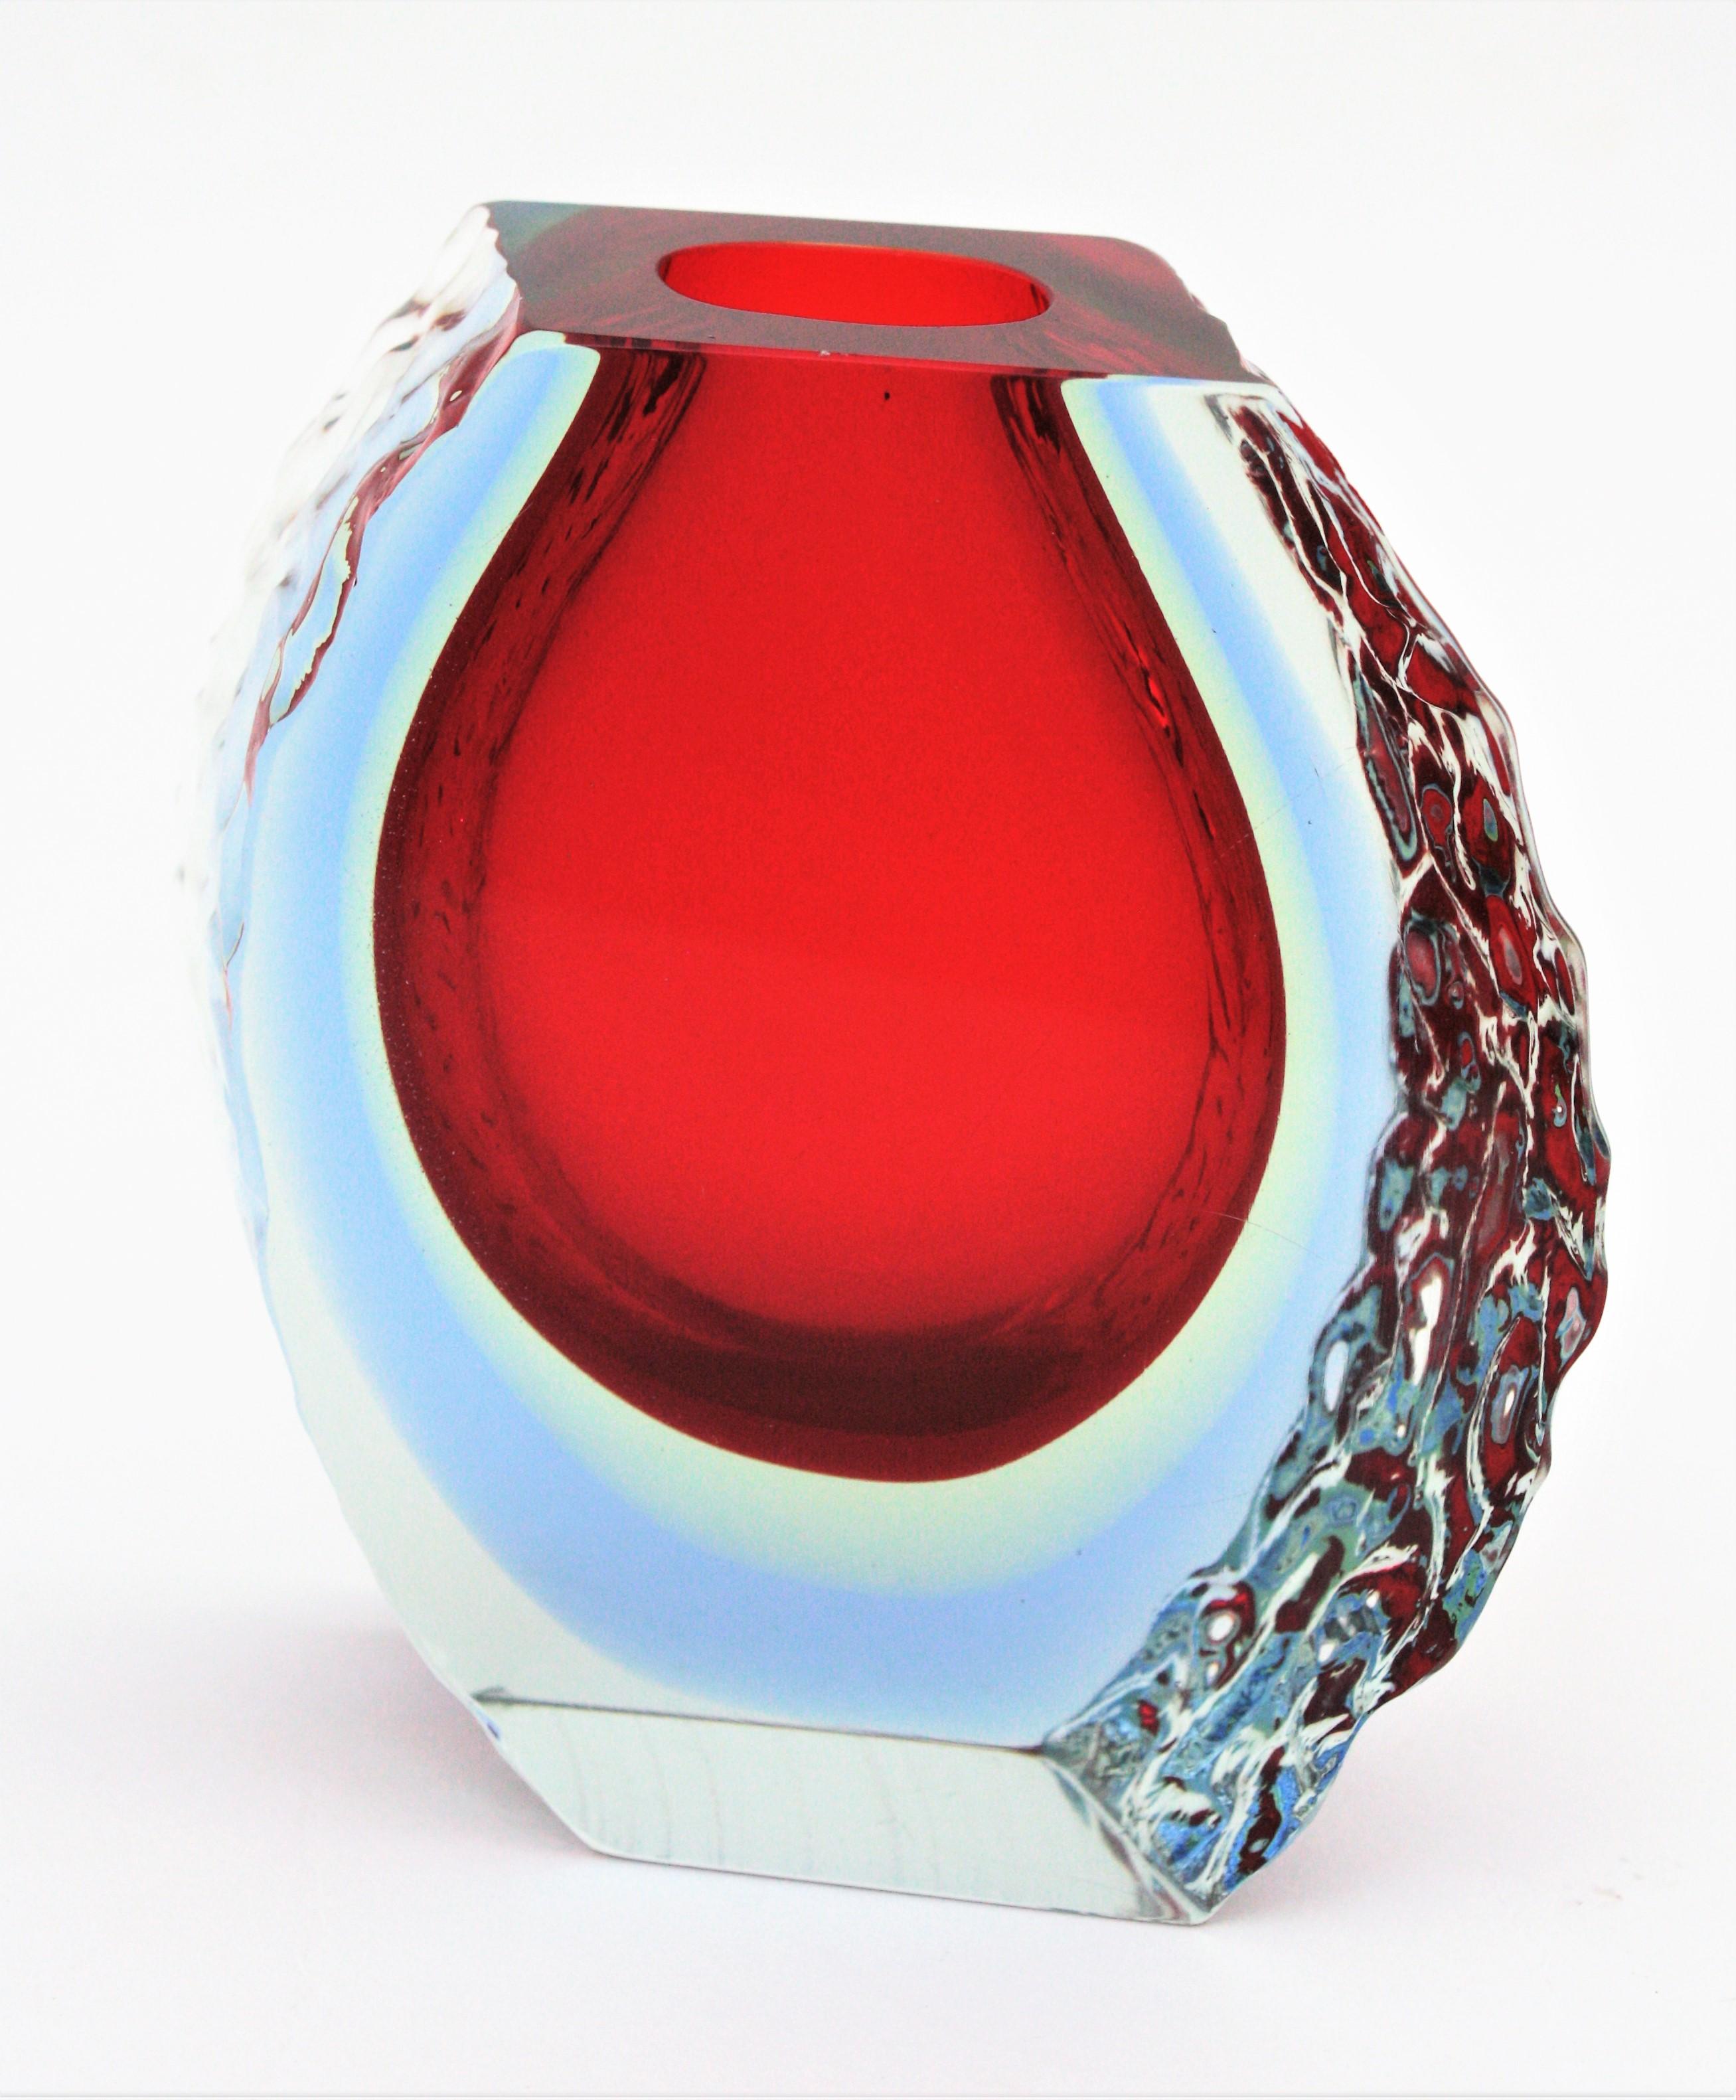 A colorful Mid-Century Modern triple cased Sommerso vase with textured ice glass sides. Attributed to Alessandro Mandruzzato, Italy, 1960s.
This vibrant red vase combines the Sommerso technique (red, light yellow and light blue glass cased into